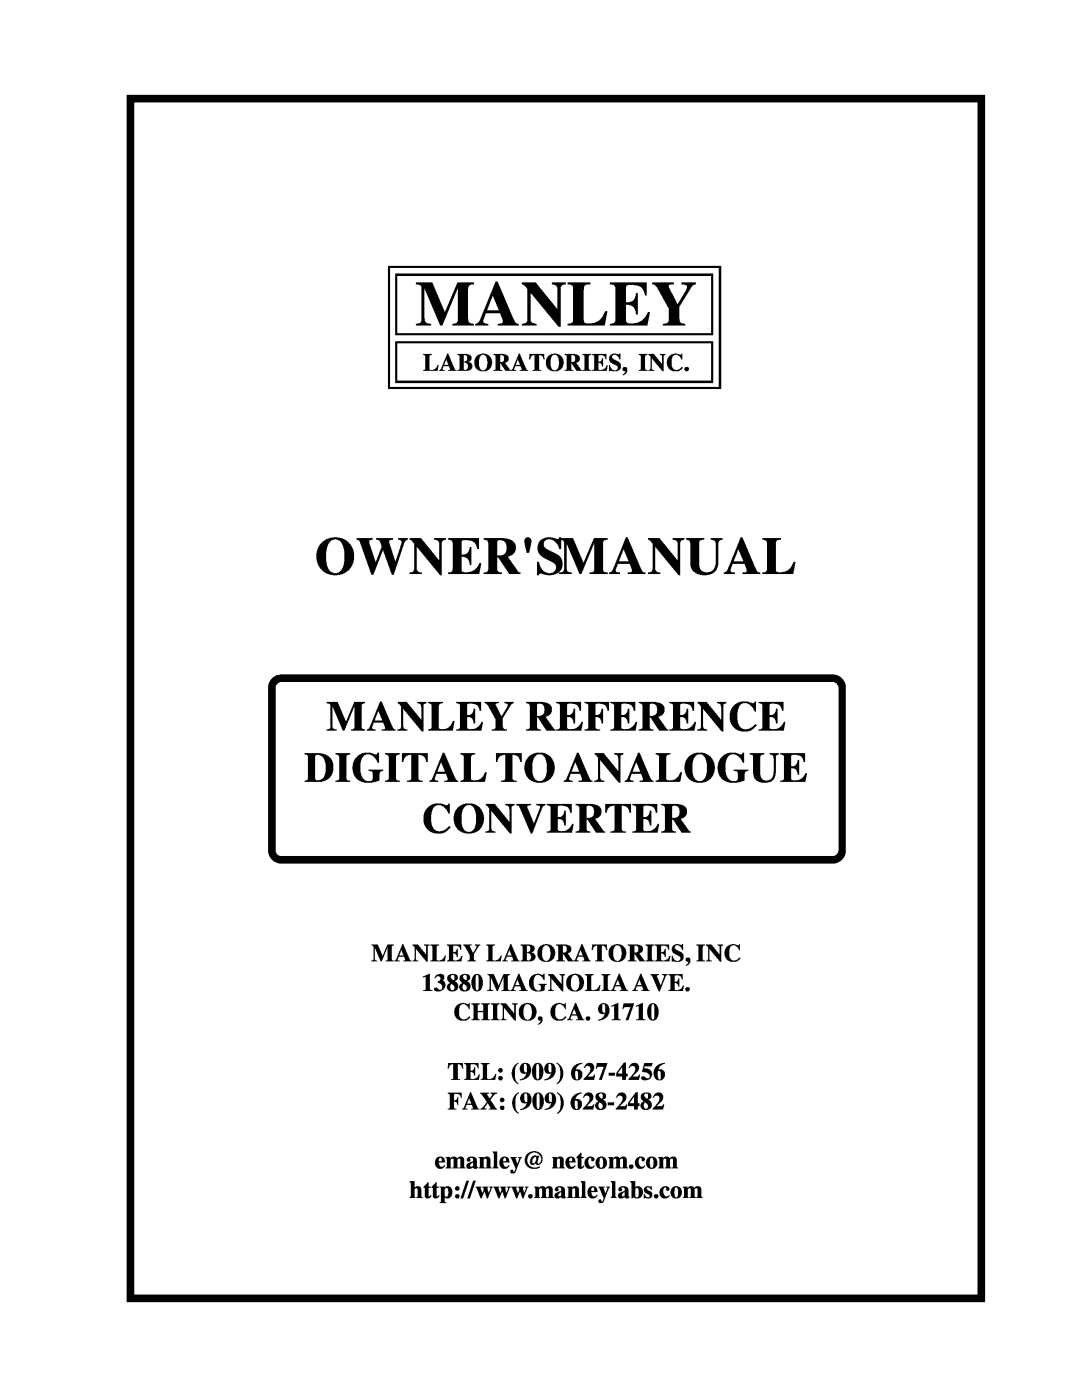 Manley Labs MANLEY REFERENCE DIGITAL TO ANALOGUE CONVERTER owner manual Manley, Ownersmanual, Laboratories, Inc 